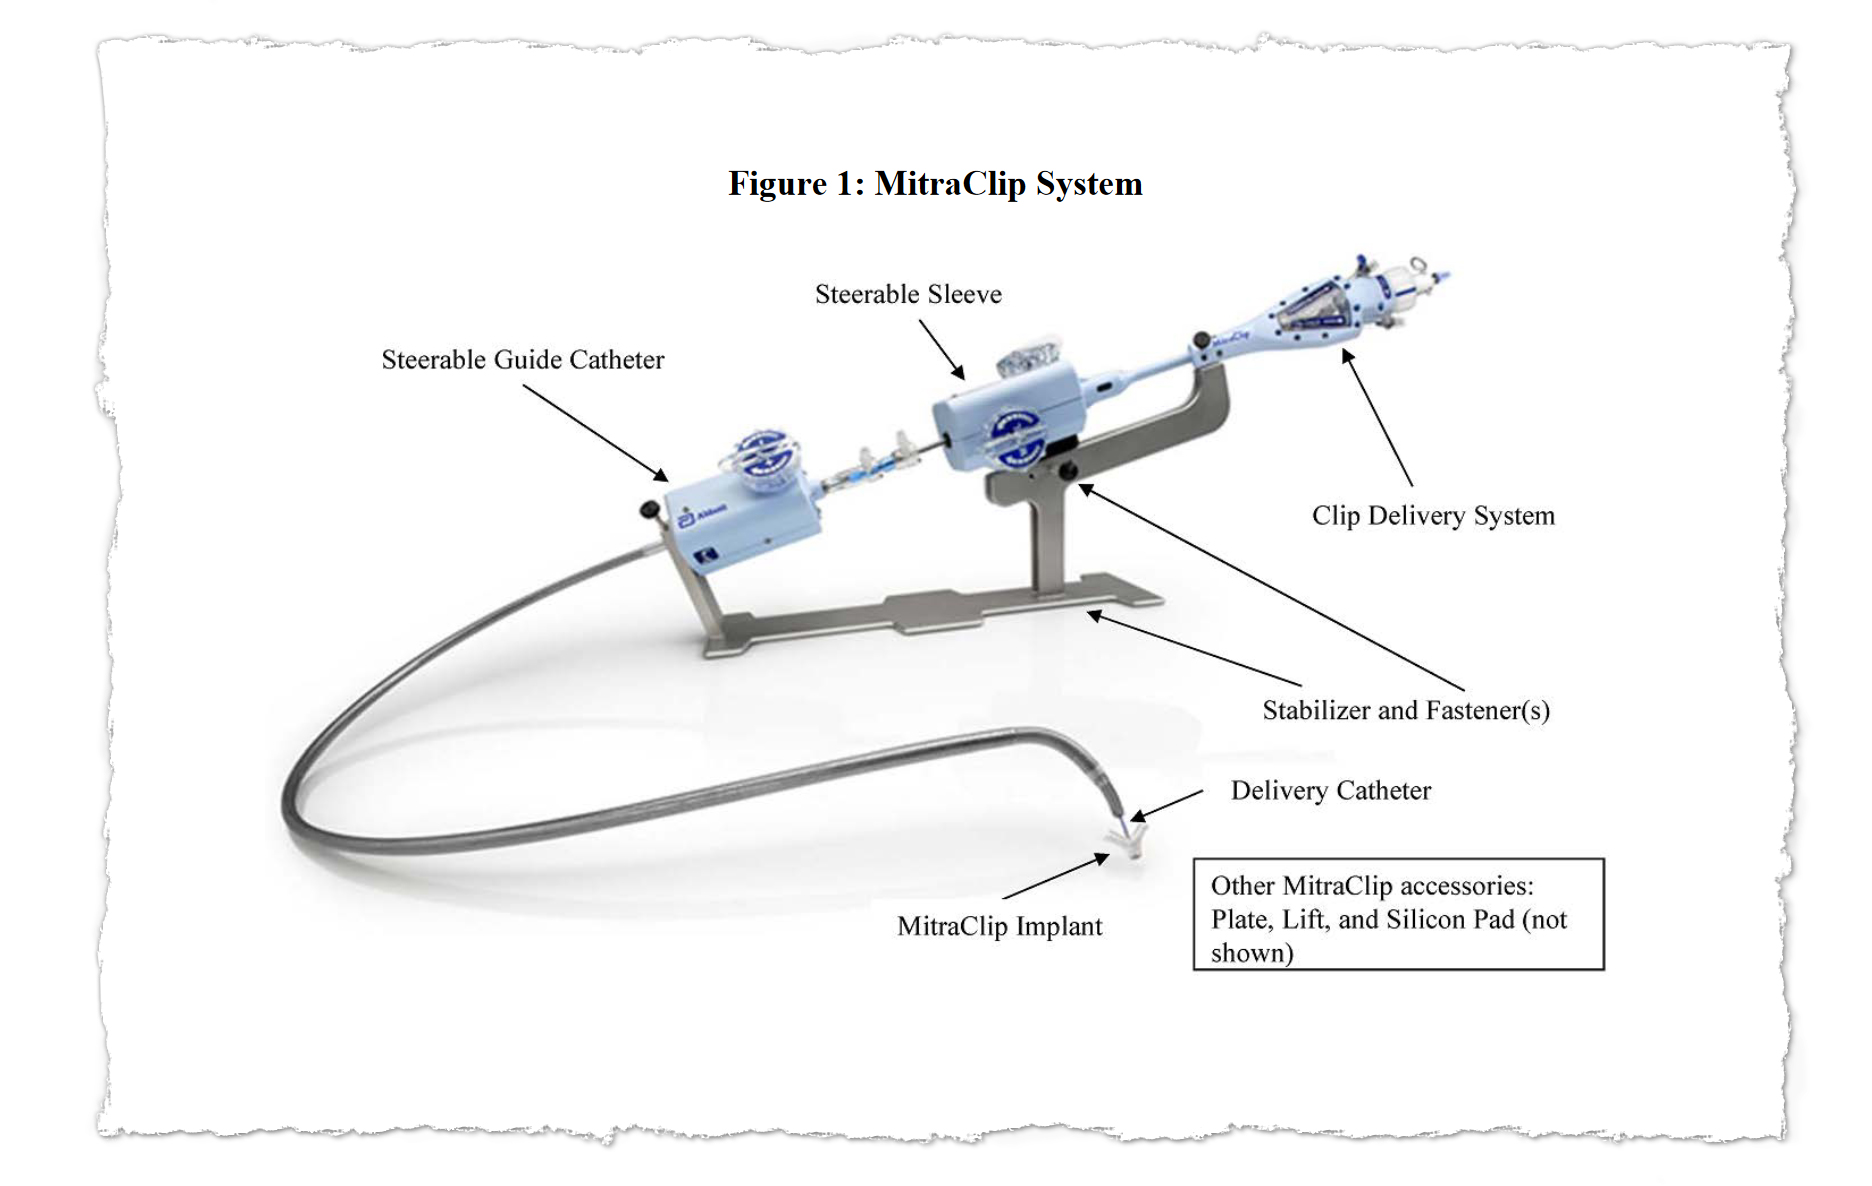 An image excerpted from an FDA document of the MitraClip system.